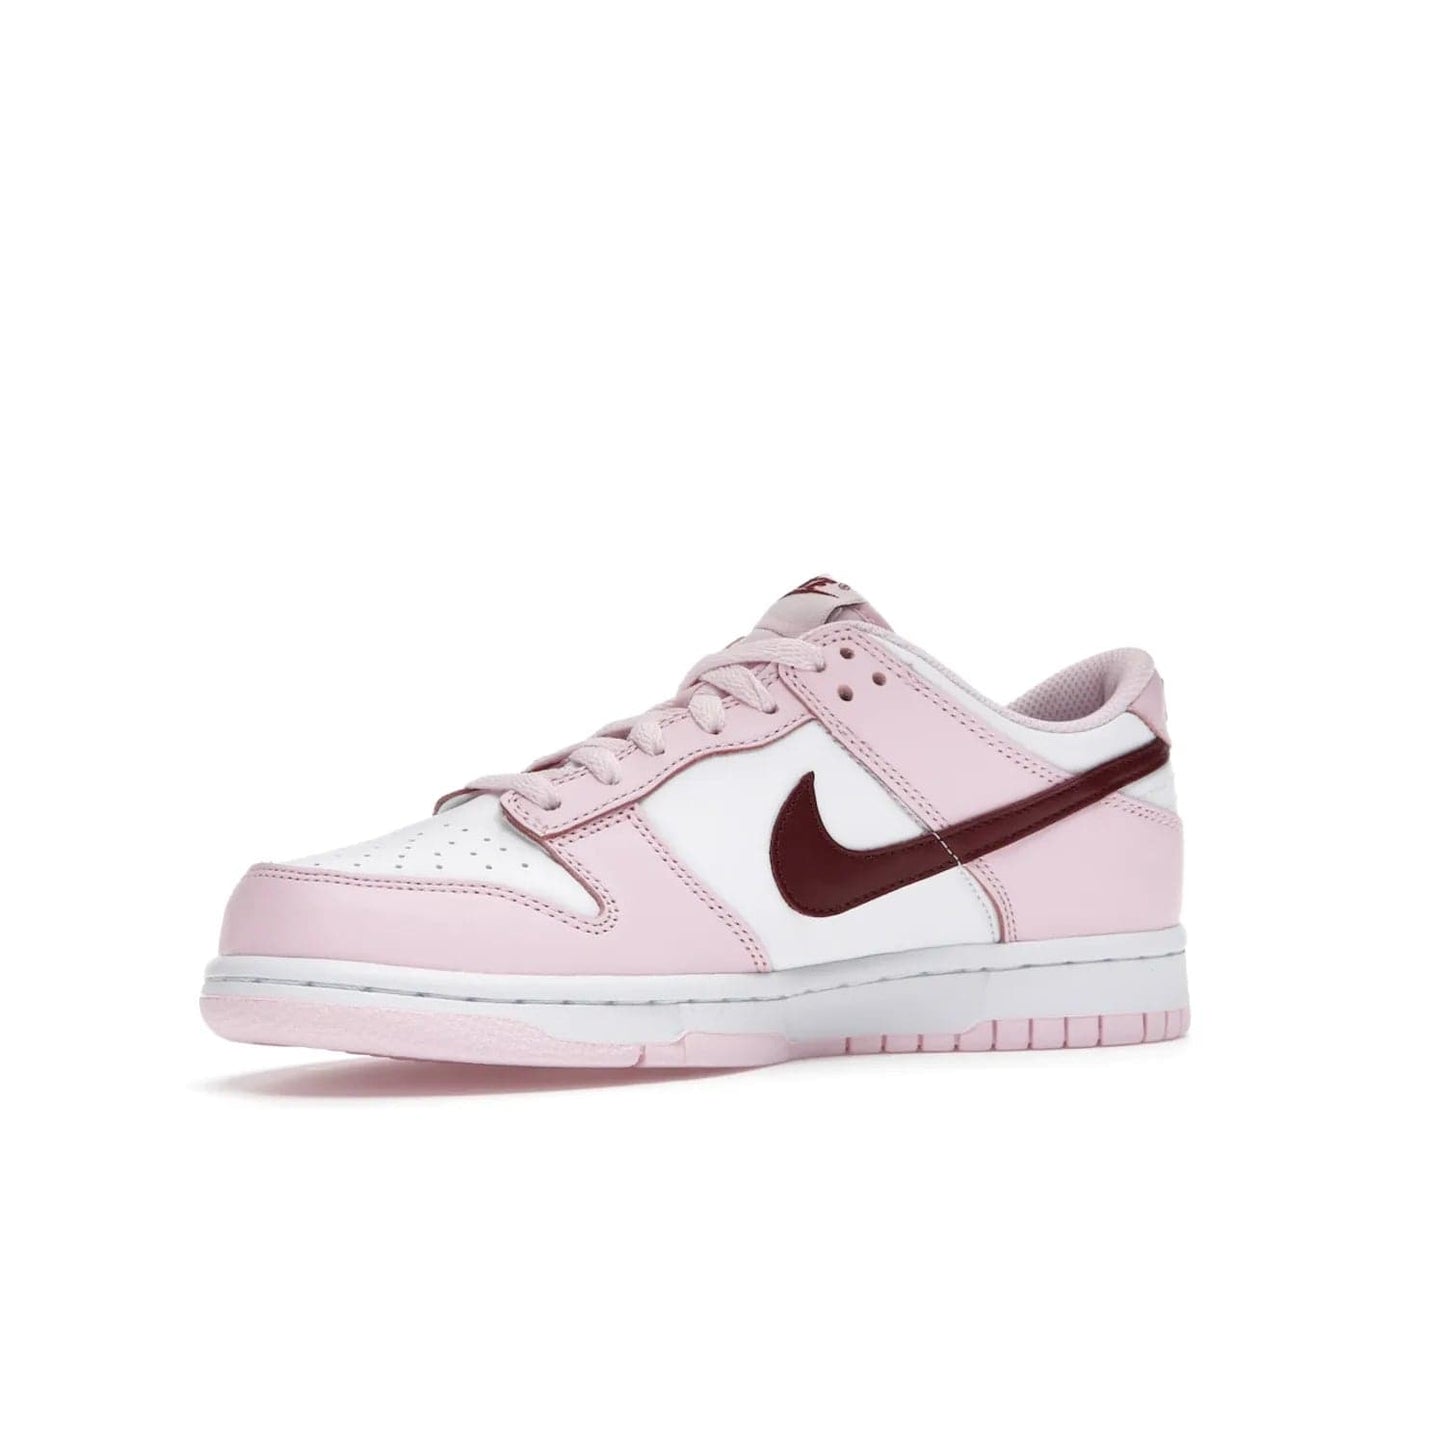 Nike Dunk Low Pink Foam Red White (GS) - Image 16 - Only at www.BallersClubKickz.com - #
Introducing the daring and stylish Nike Dunk Low Pink Foam Red White (GS) sneaker for grade schoolers. White leather with pink overlays and Dark Beetroot accents, classic Nike Dunk midsole and pink outsole. Released August 2021 for $85.